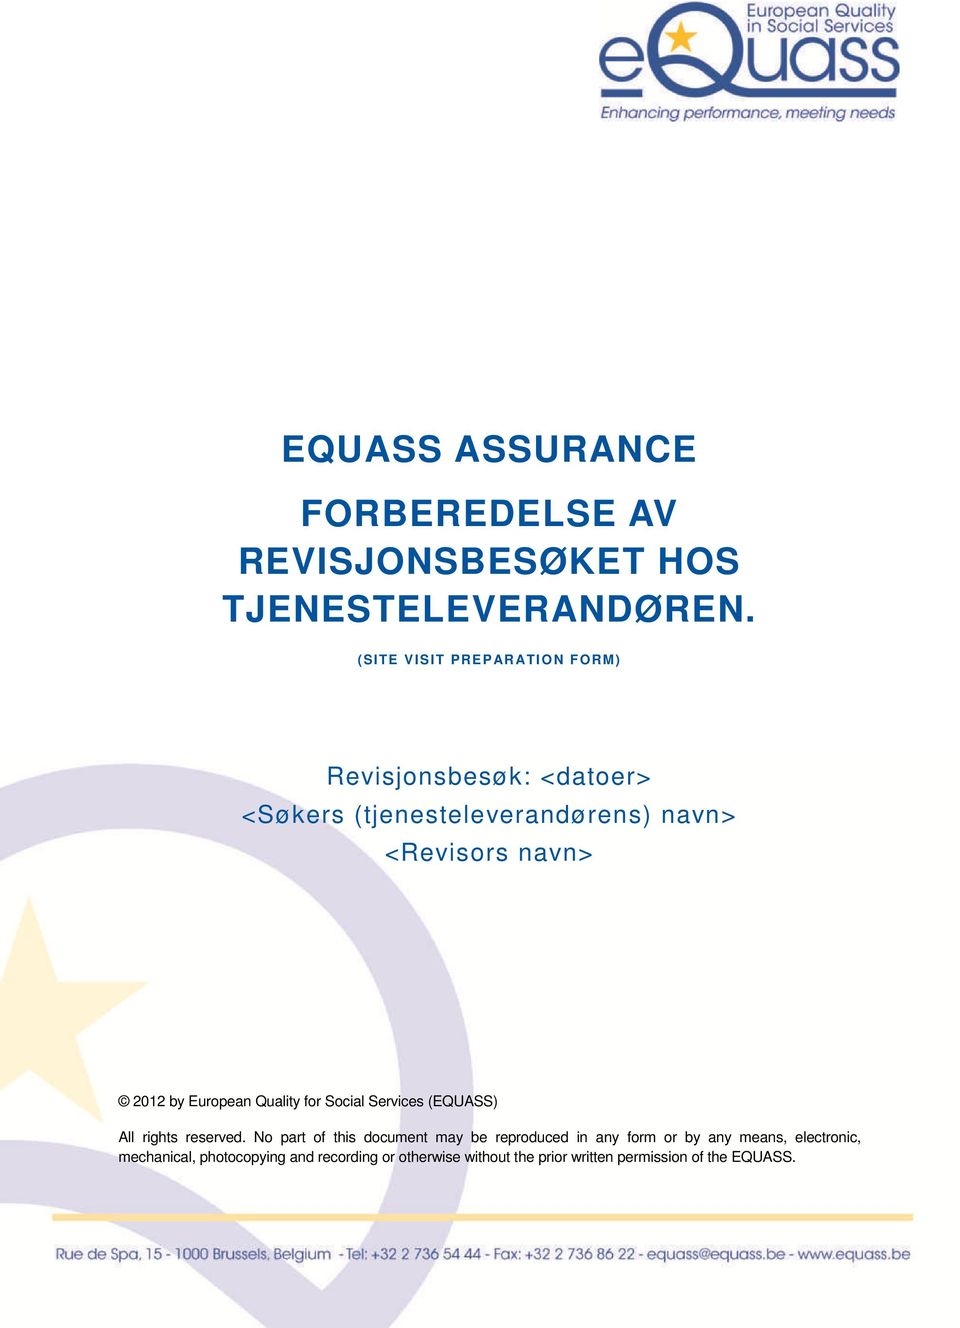 2012 by European Quality for Social Services (EQUASS) All rights reserved.